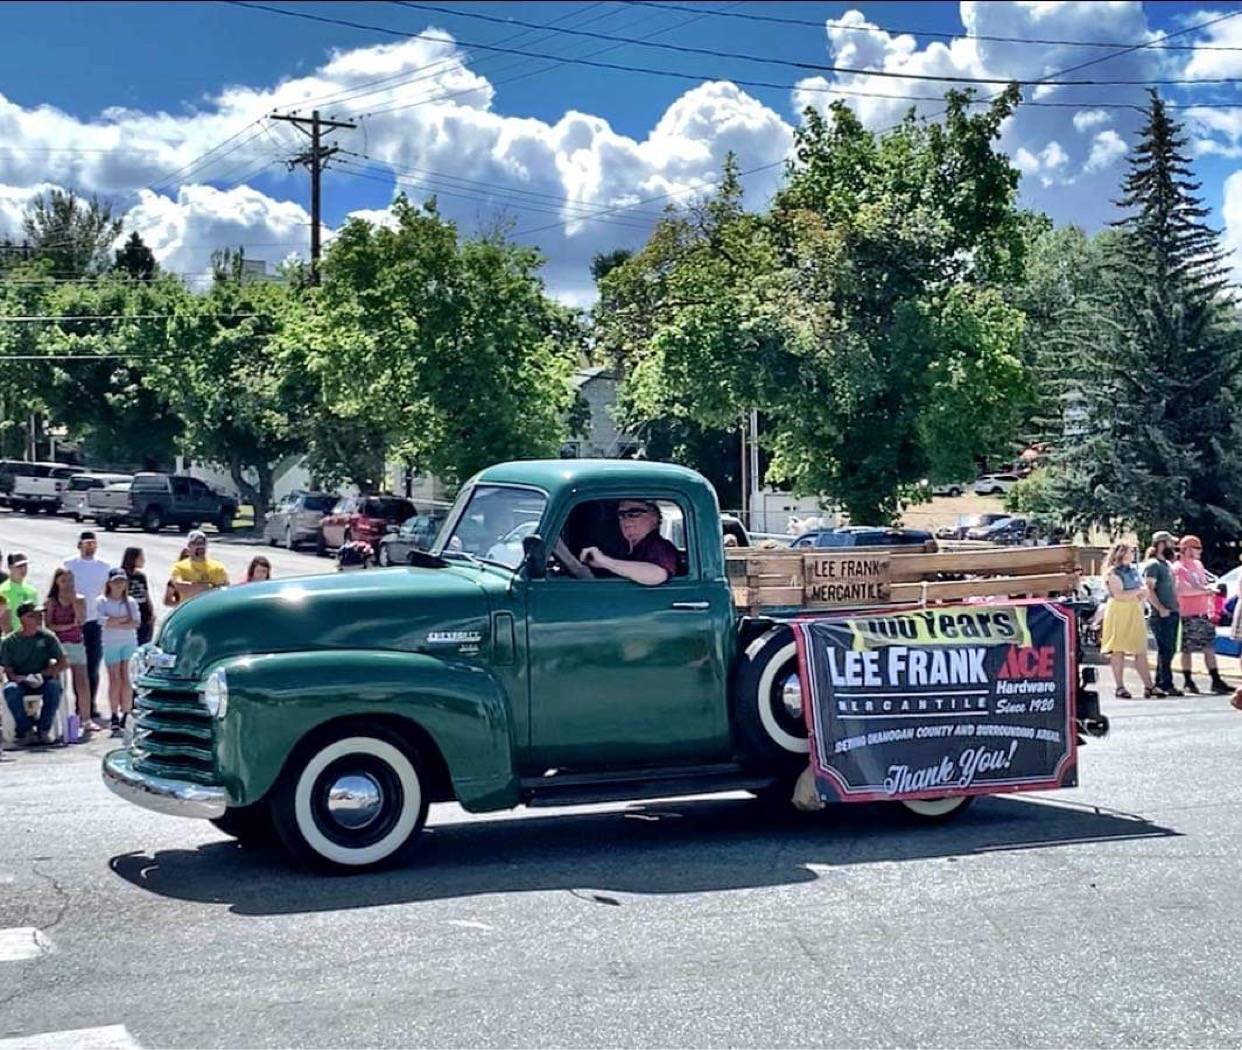 Stacey Kester/submitted photo
Dave Kester, owner of Lee Frank Mercantile, drove Old Joe, a 1950 Chevy pickup truck, with with banners on the side, to celebrate the 100th year anniversary of the store, during Tonasket’s Founders Day Weekend.